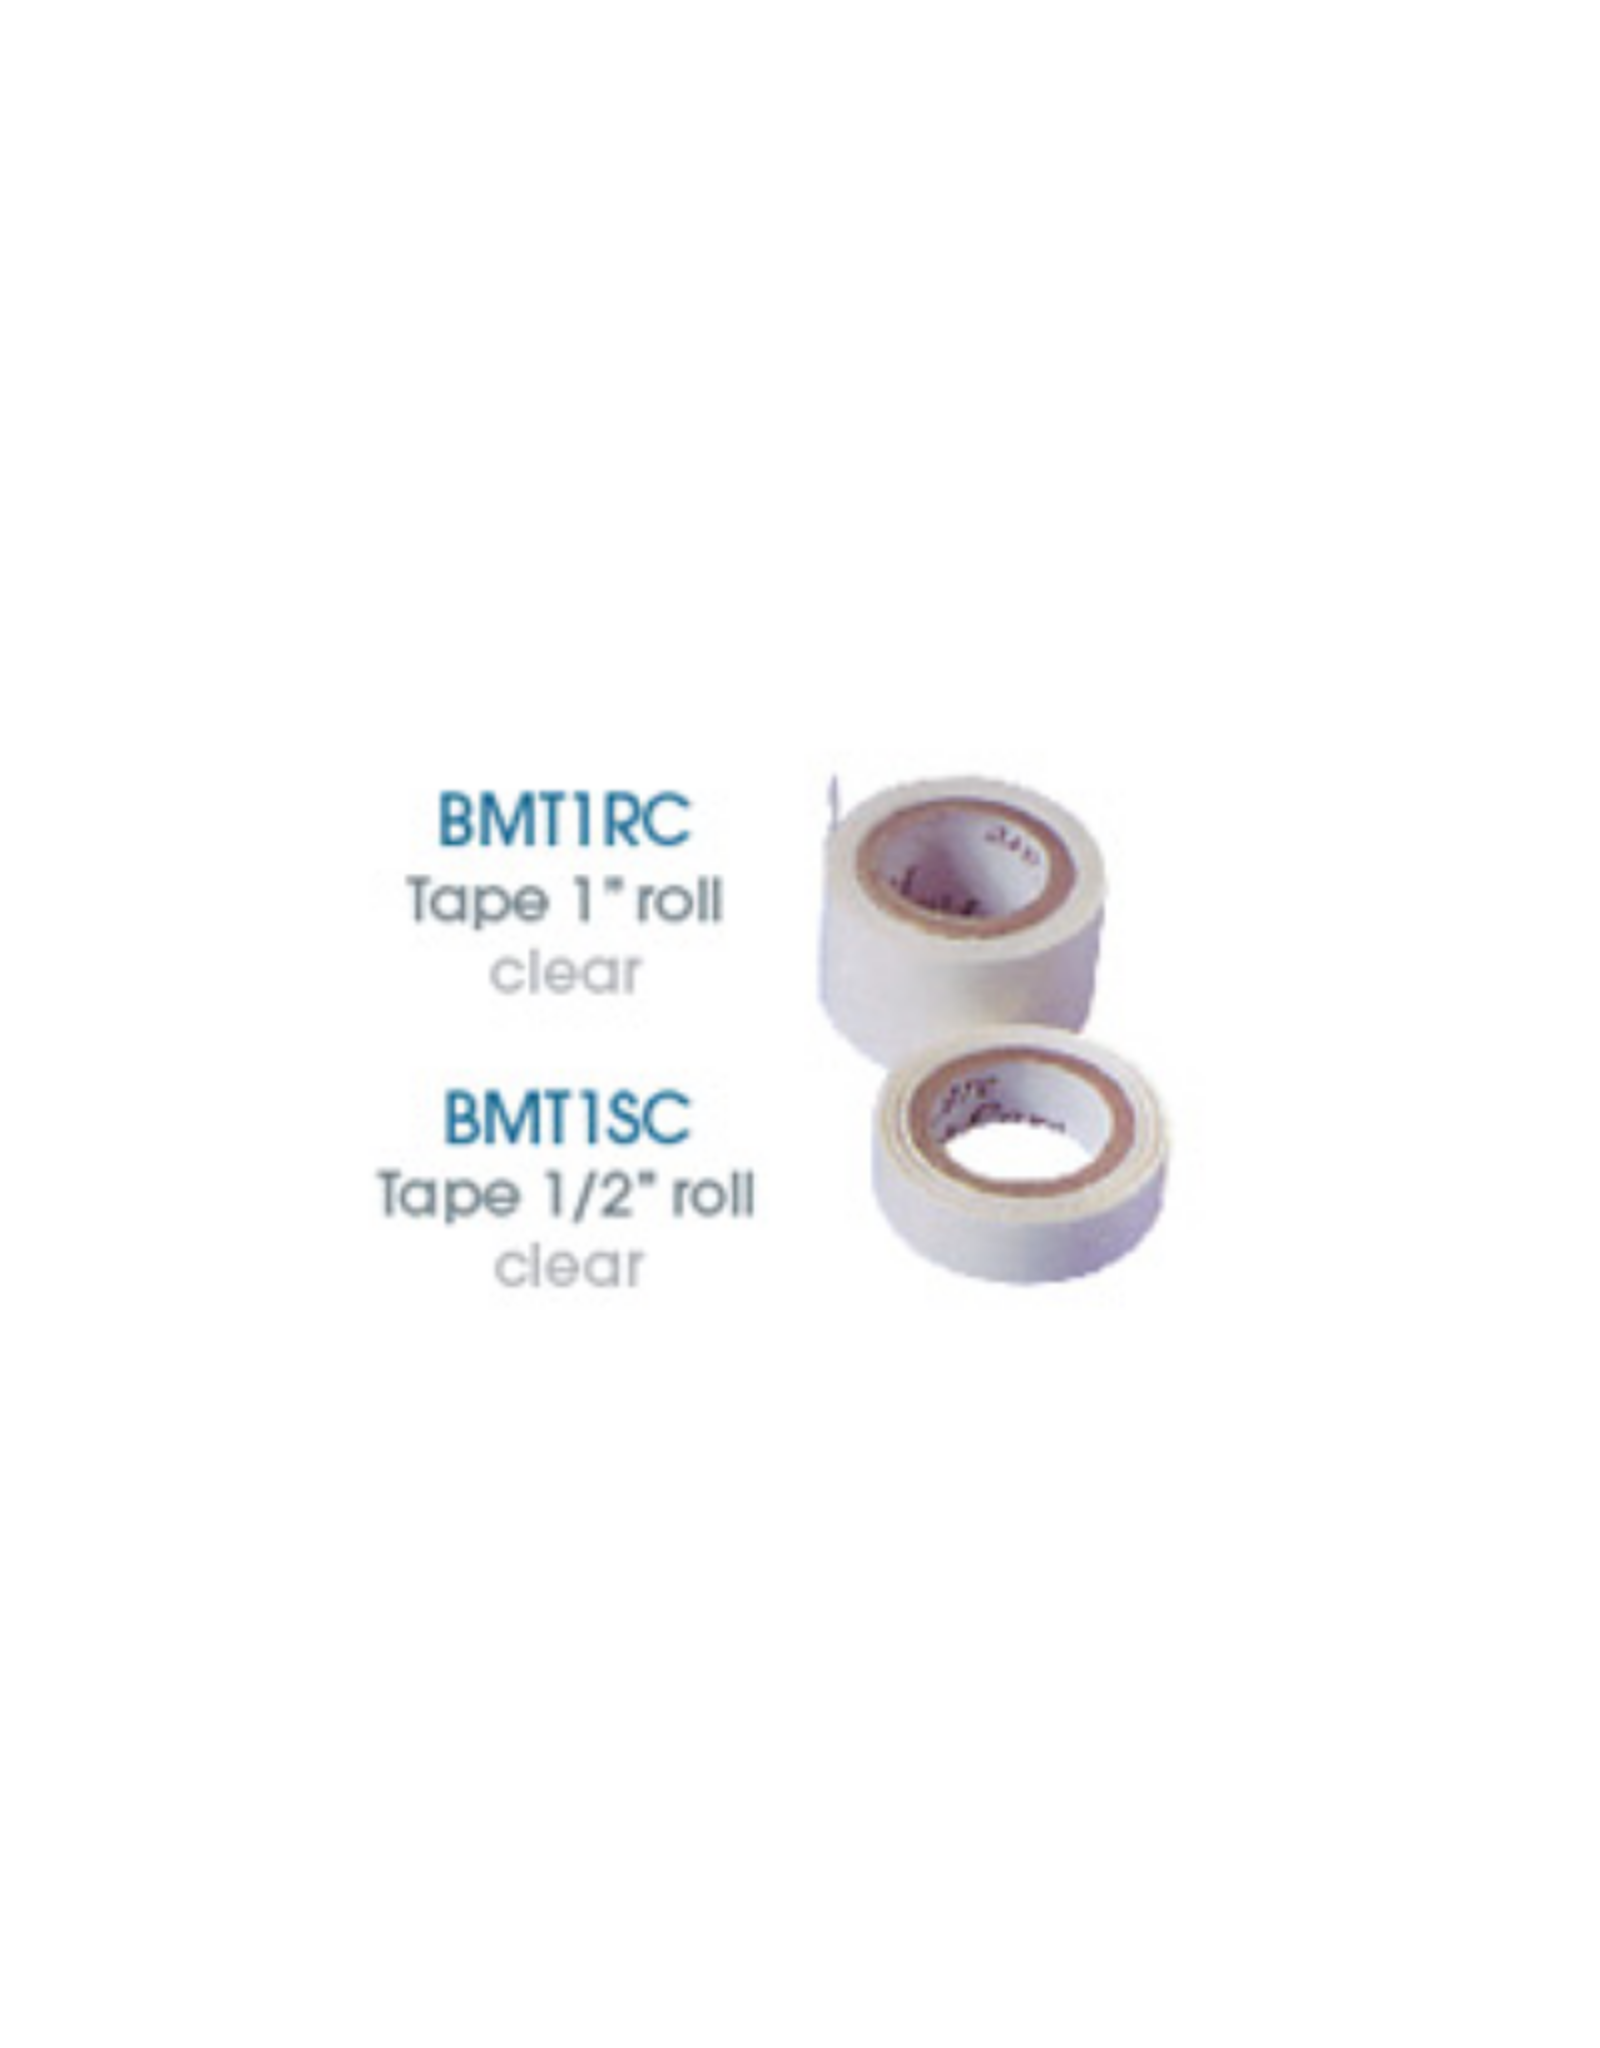 T TAPE 1/2" ROLL, CLEAR